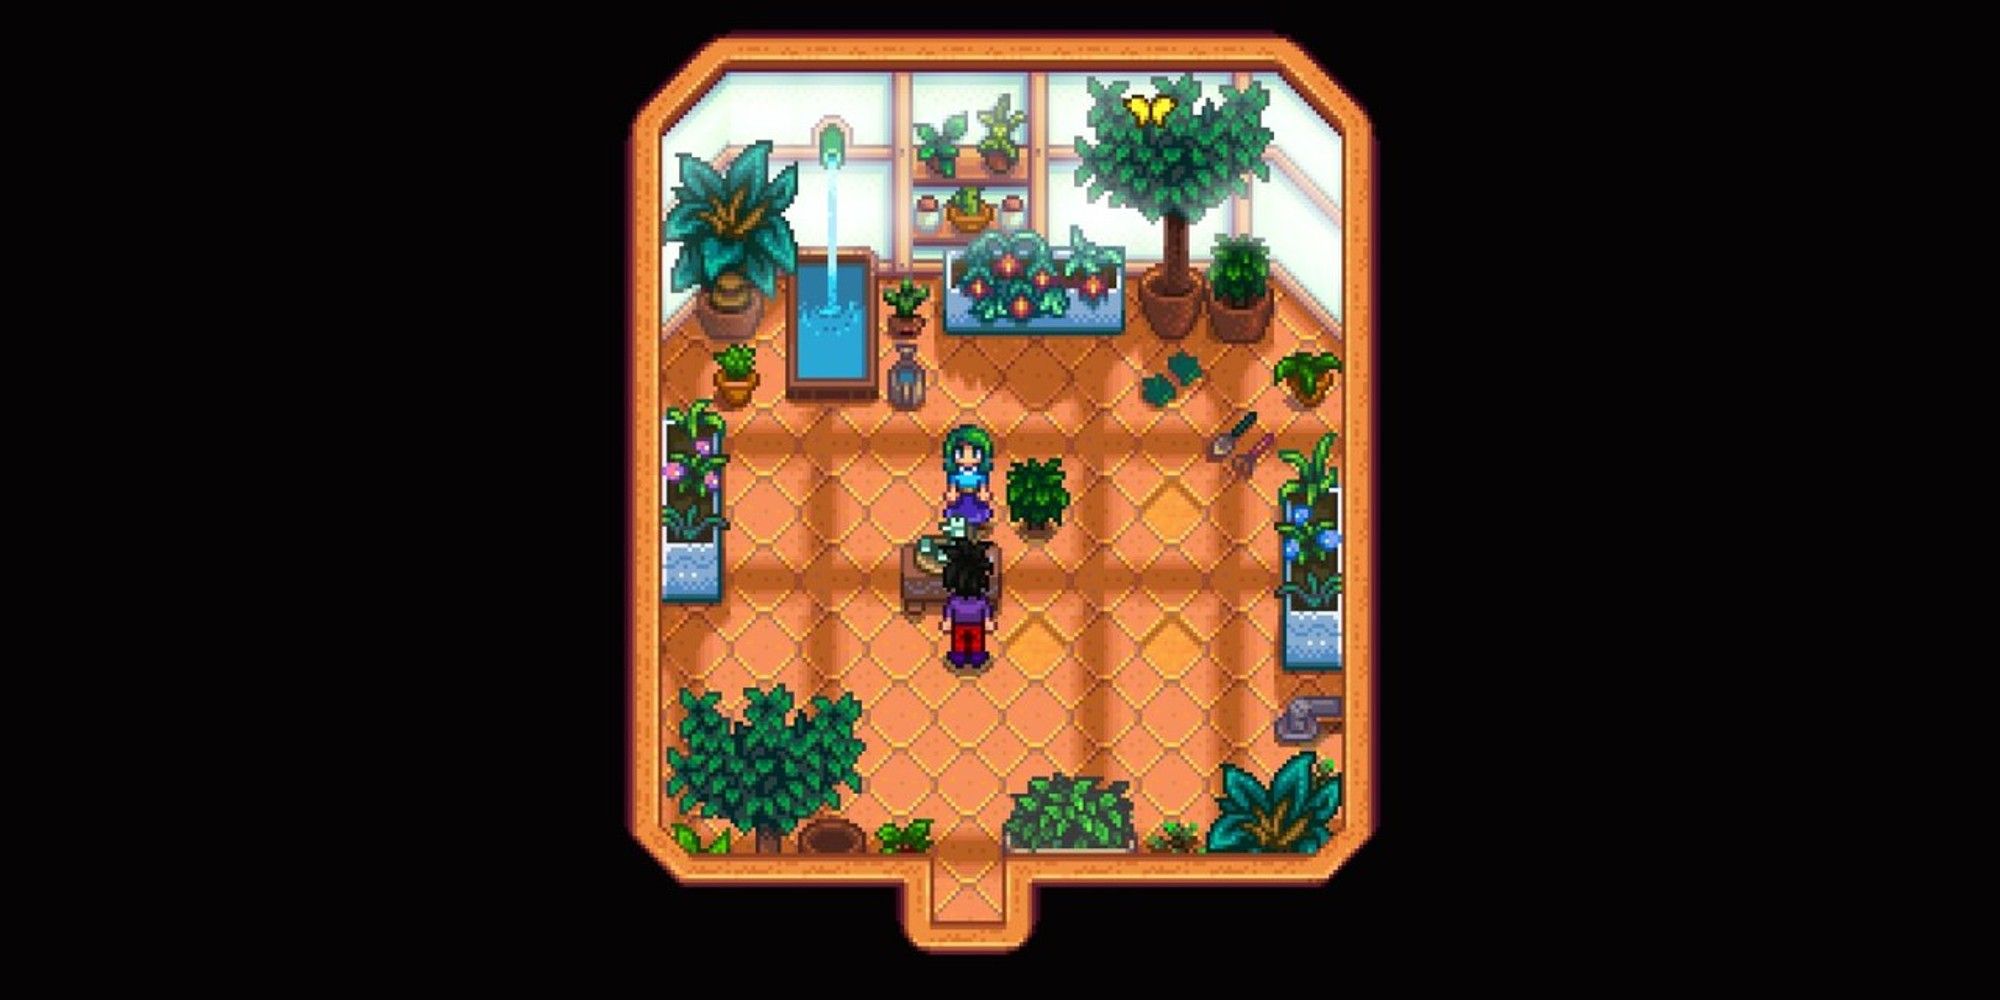 player interacted with caroline in her sunroom for her two heart event